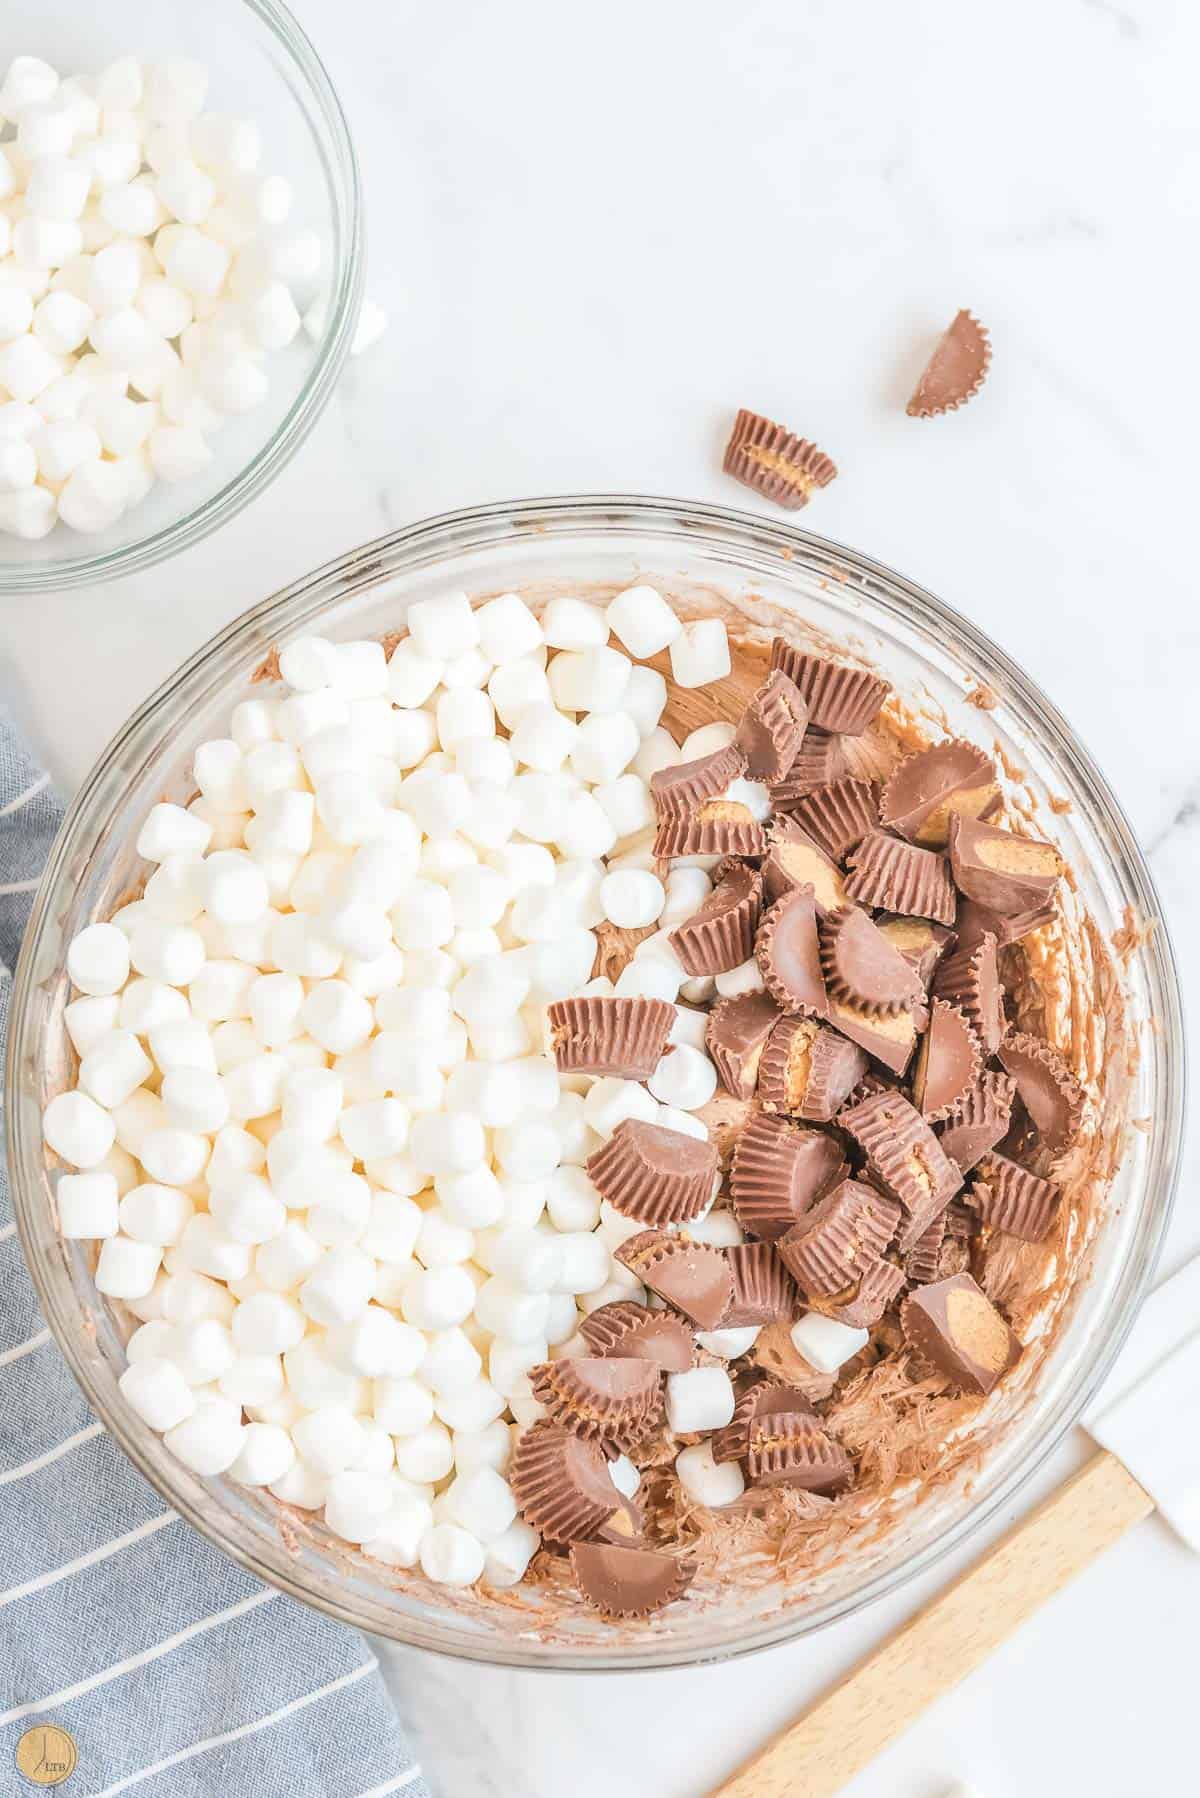 mini marshmallows and chopped peanut butter cups in a clear bowl